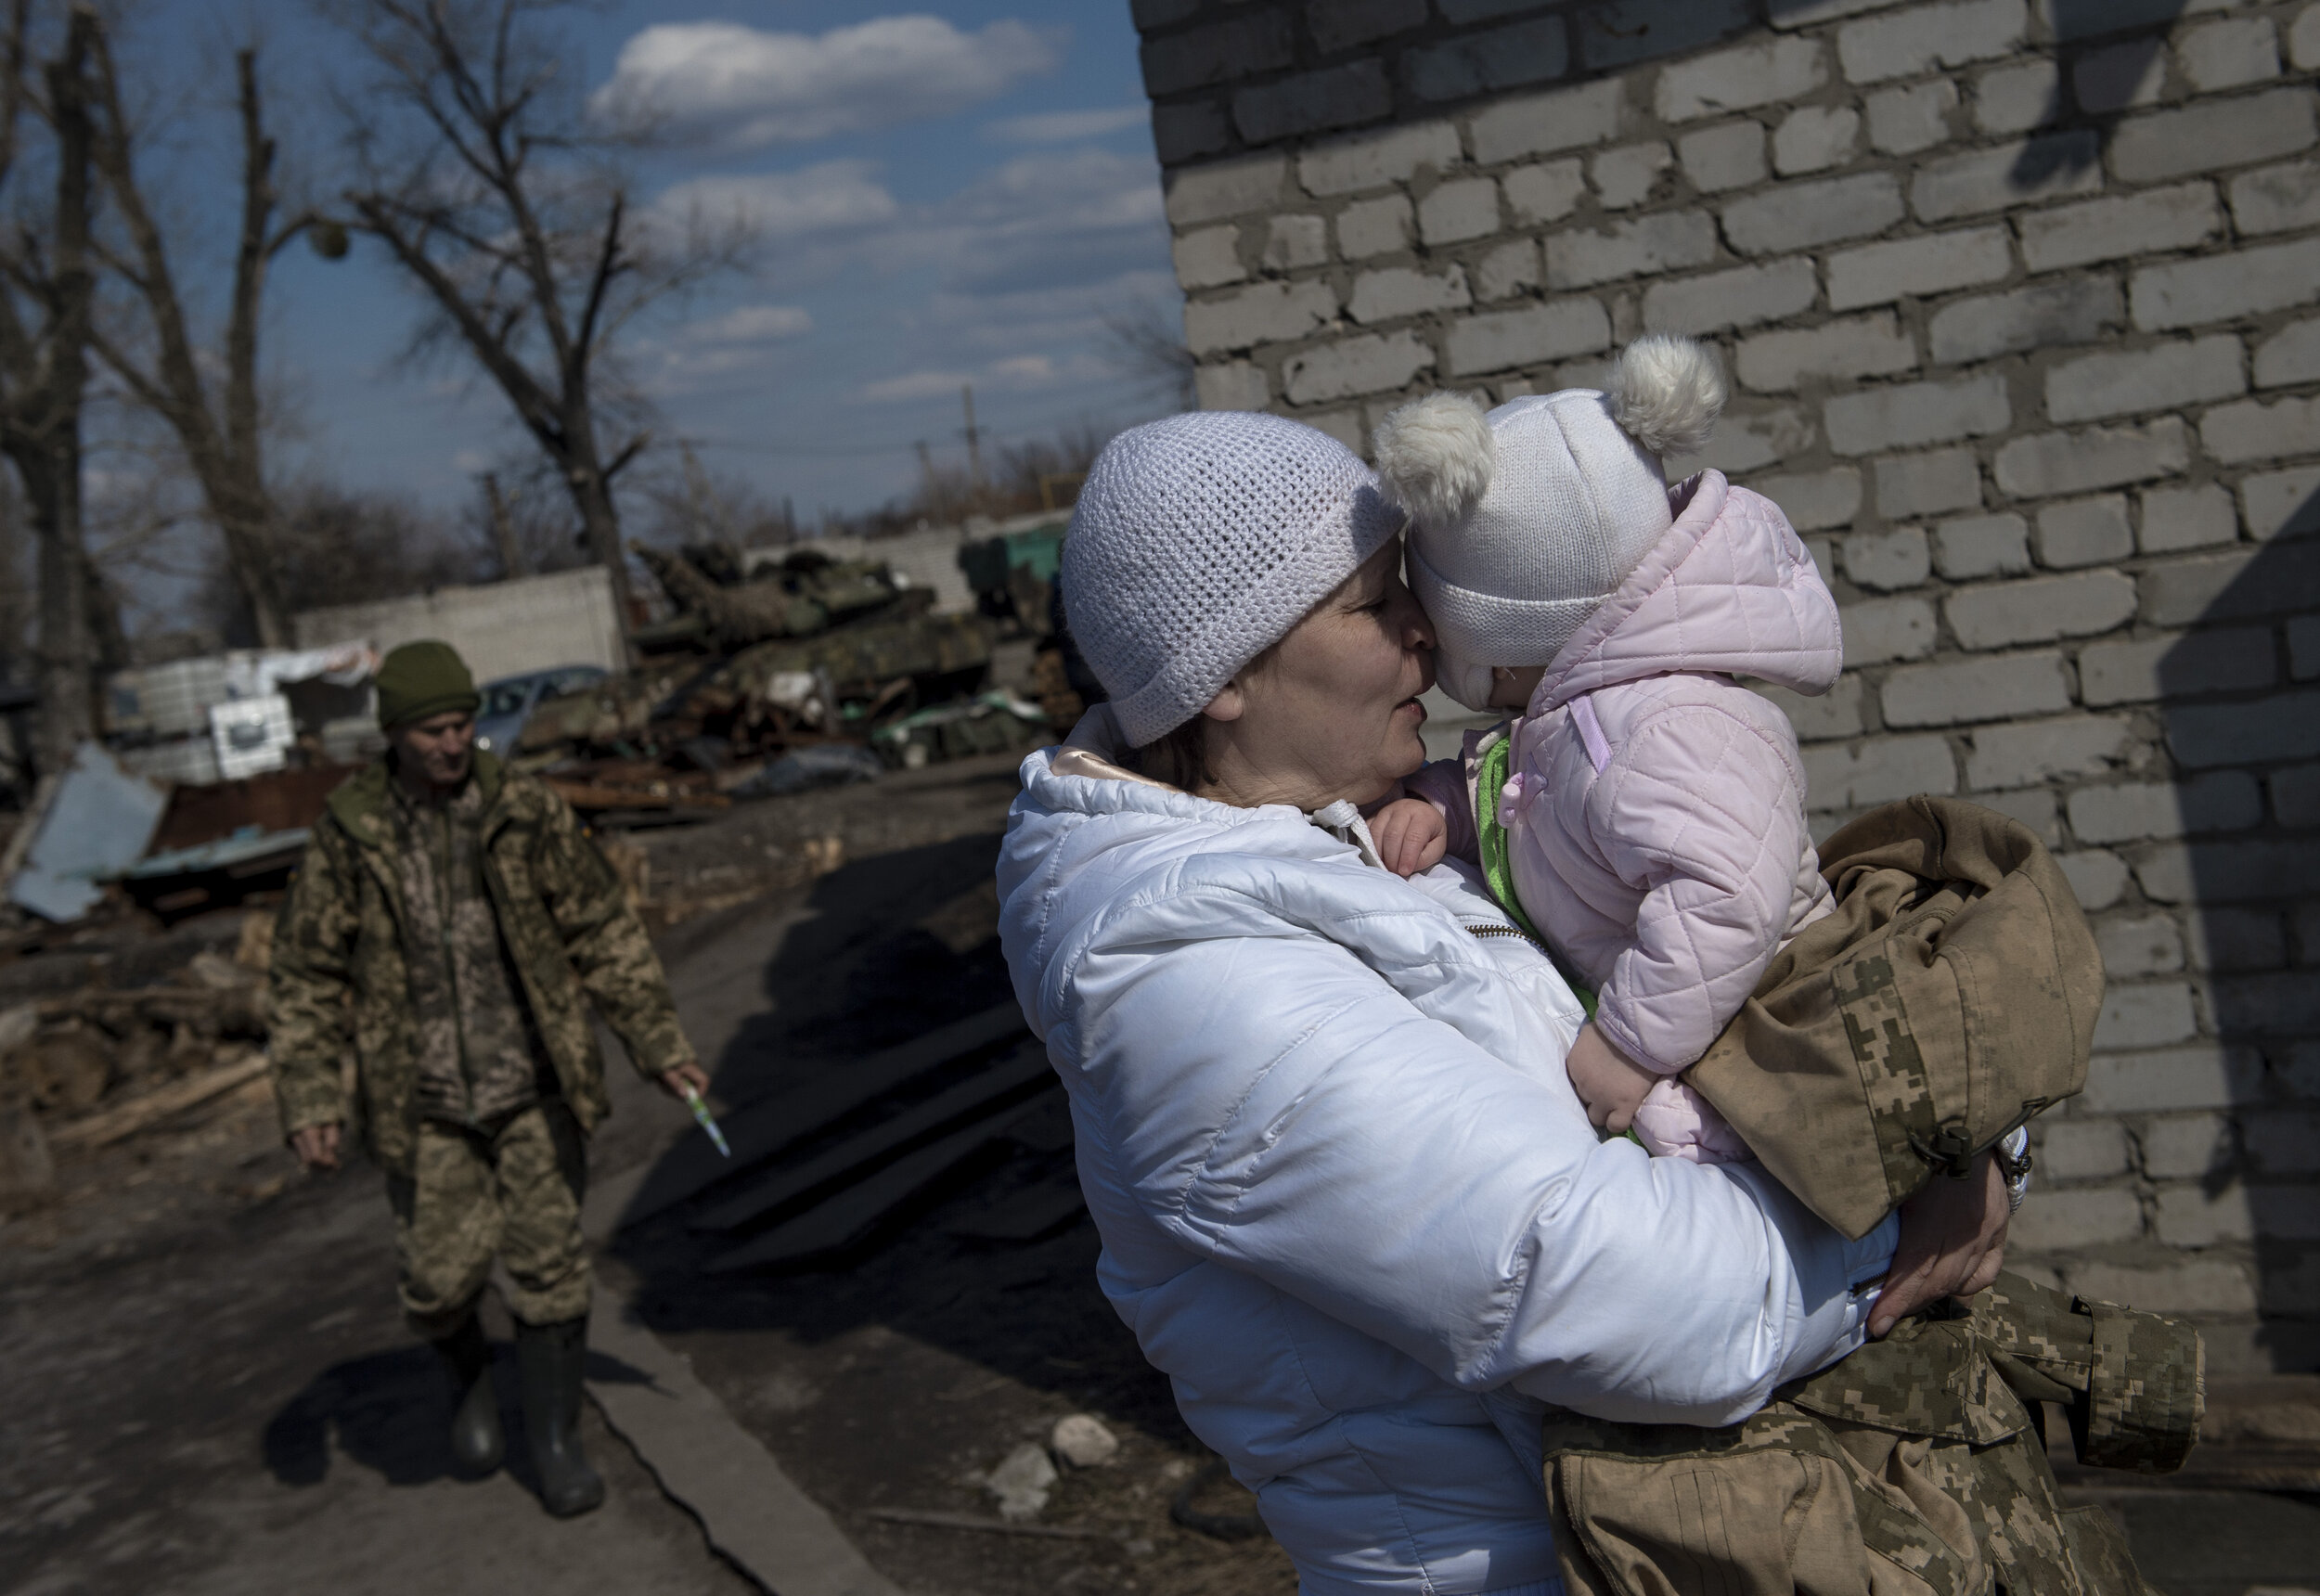  A woman embraces her granddaughter while visiting the young girl’s father at a military outpost several miles from the frontlines. While most soldiers find themselves spending months at a time away from loved ones, others find themselves stationed n